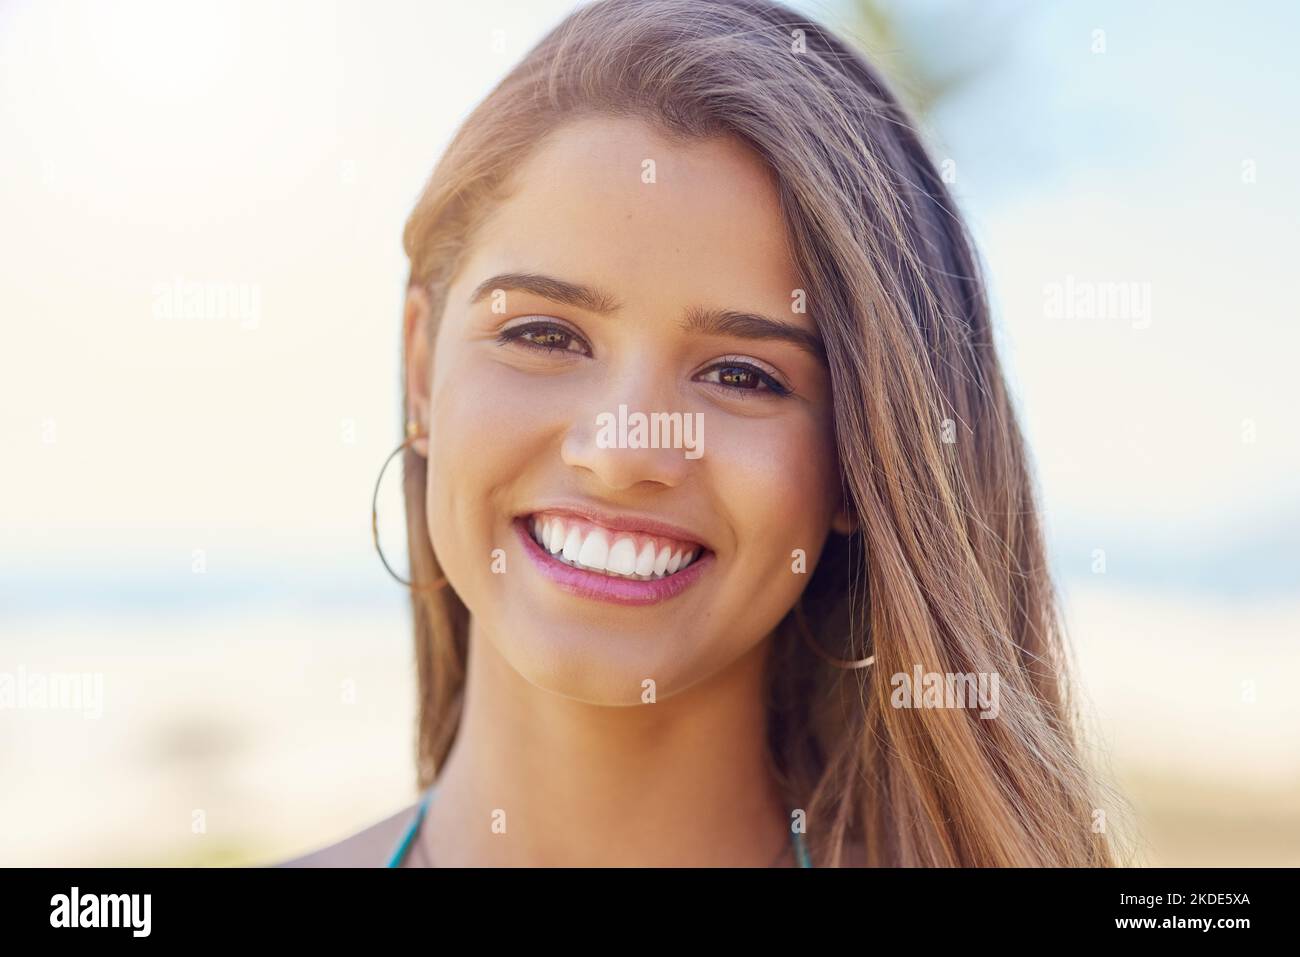 I live for summer. Portrait of an attractive young woman standing outside on a sunny day. Stock Photo